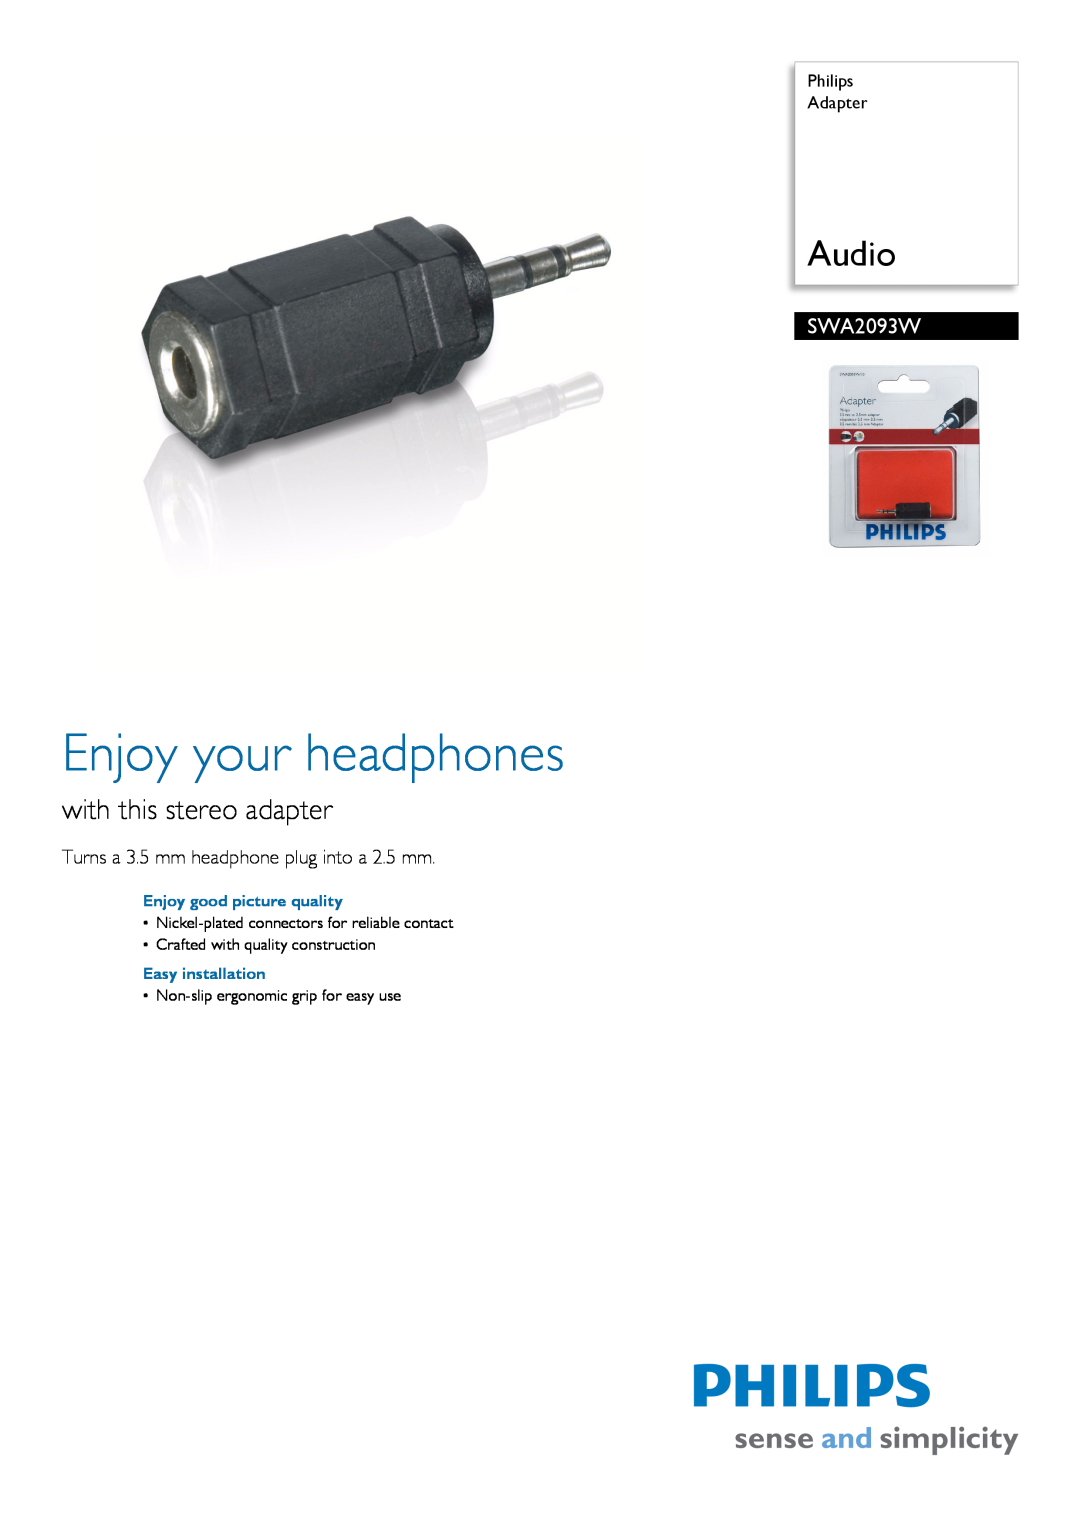 Philips SWA2093W manual Philips Adapter, Enjoy good picture quality, Easy installation, Enjoy your headphones, Audio 